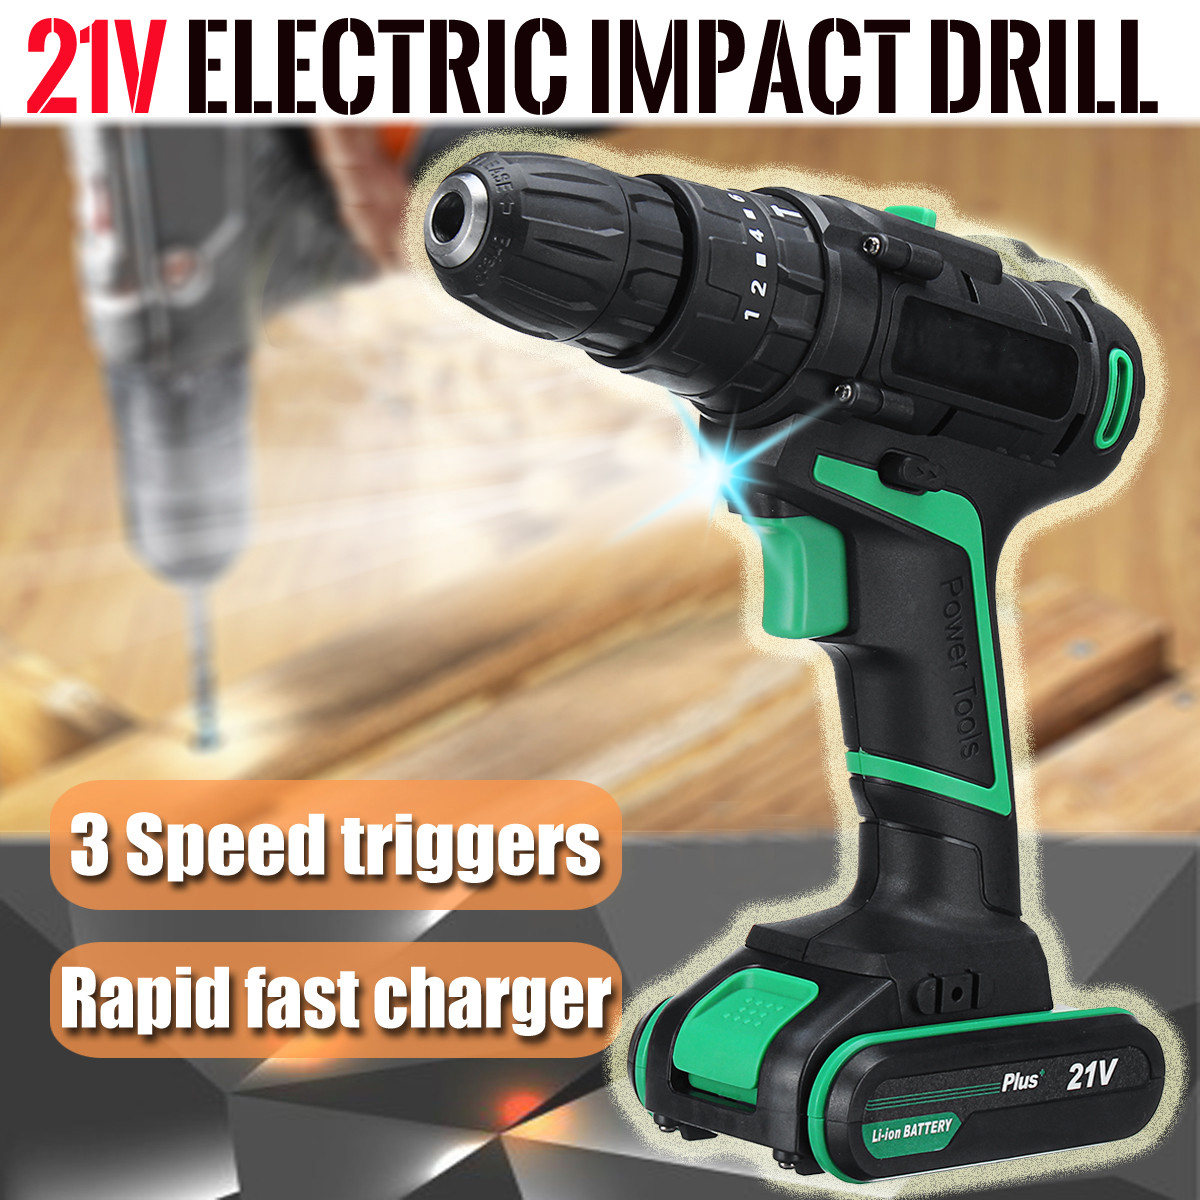 21V-Multi-function-Electric-Screwdriver-Rechargeable-Cordless-Power-Drilling-Tools-Power-Drills-1376917-1